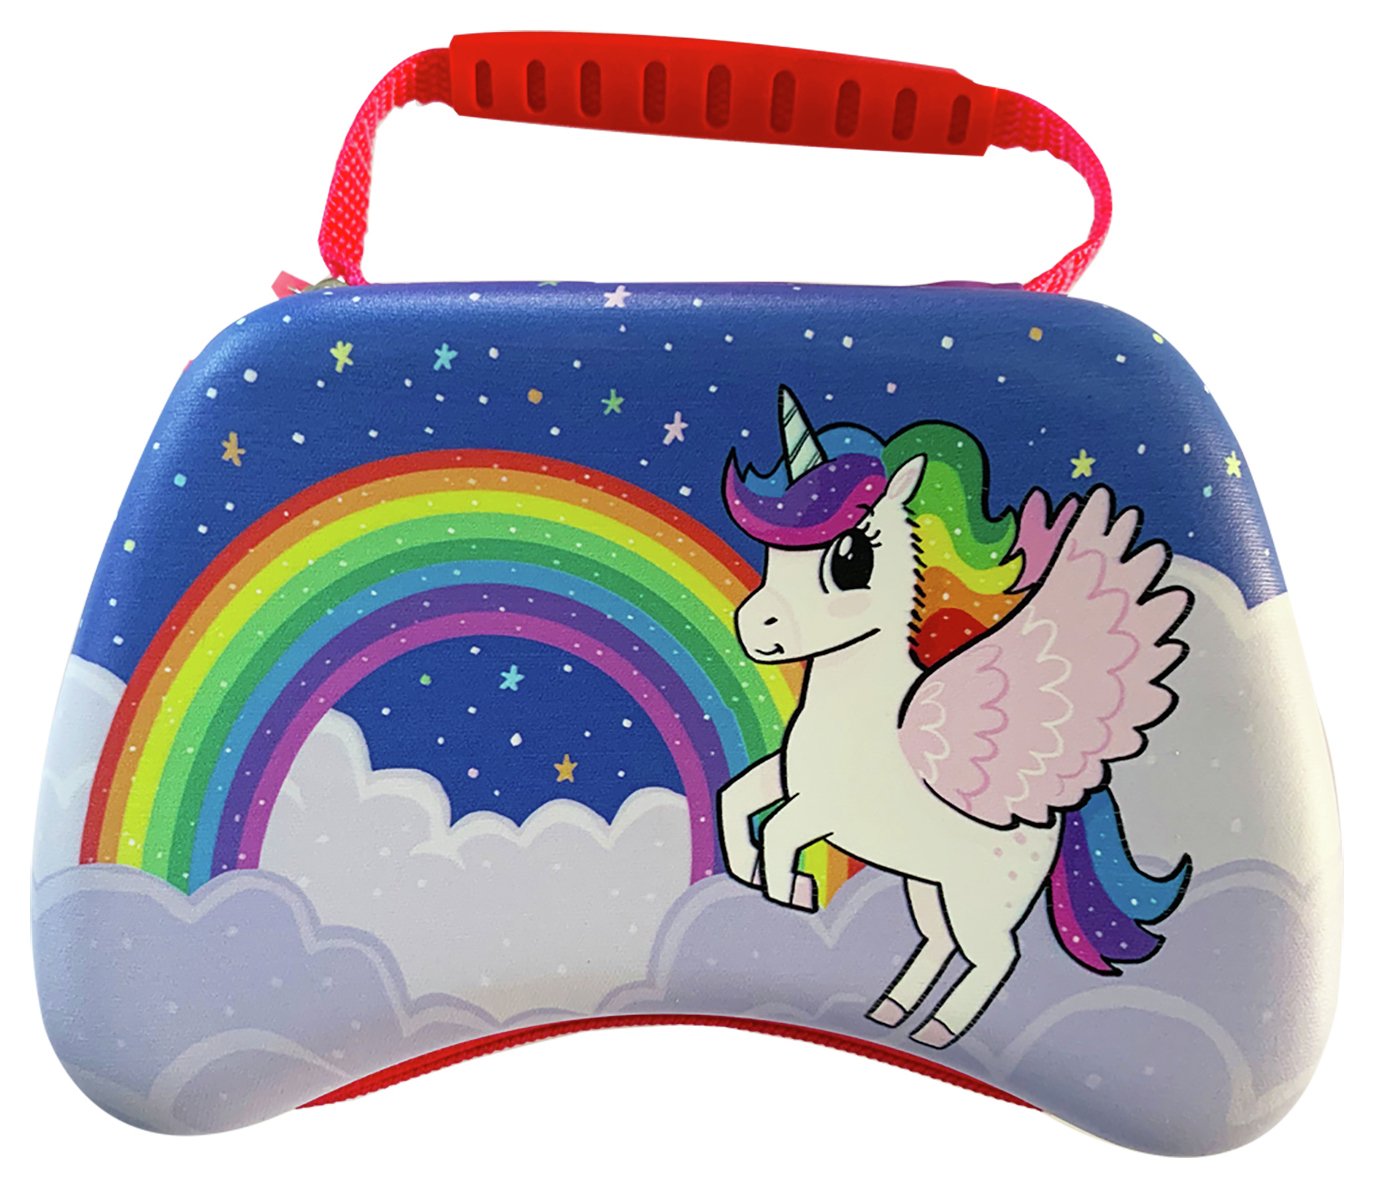 Unicorn Game Controller Case Review